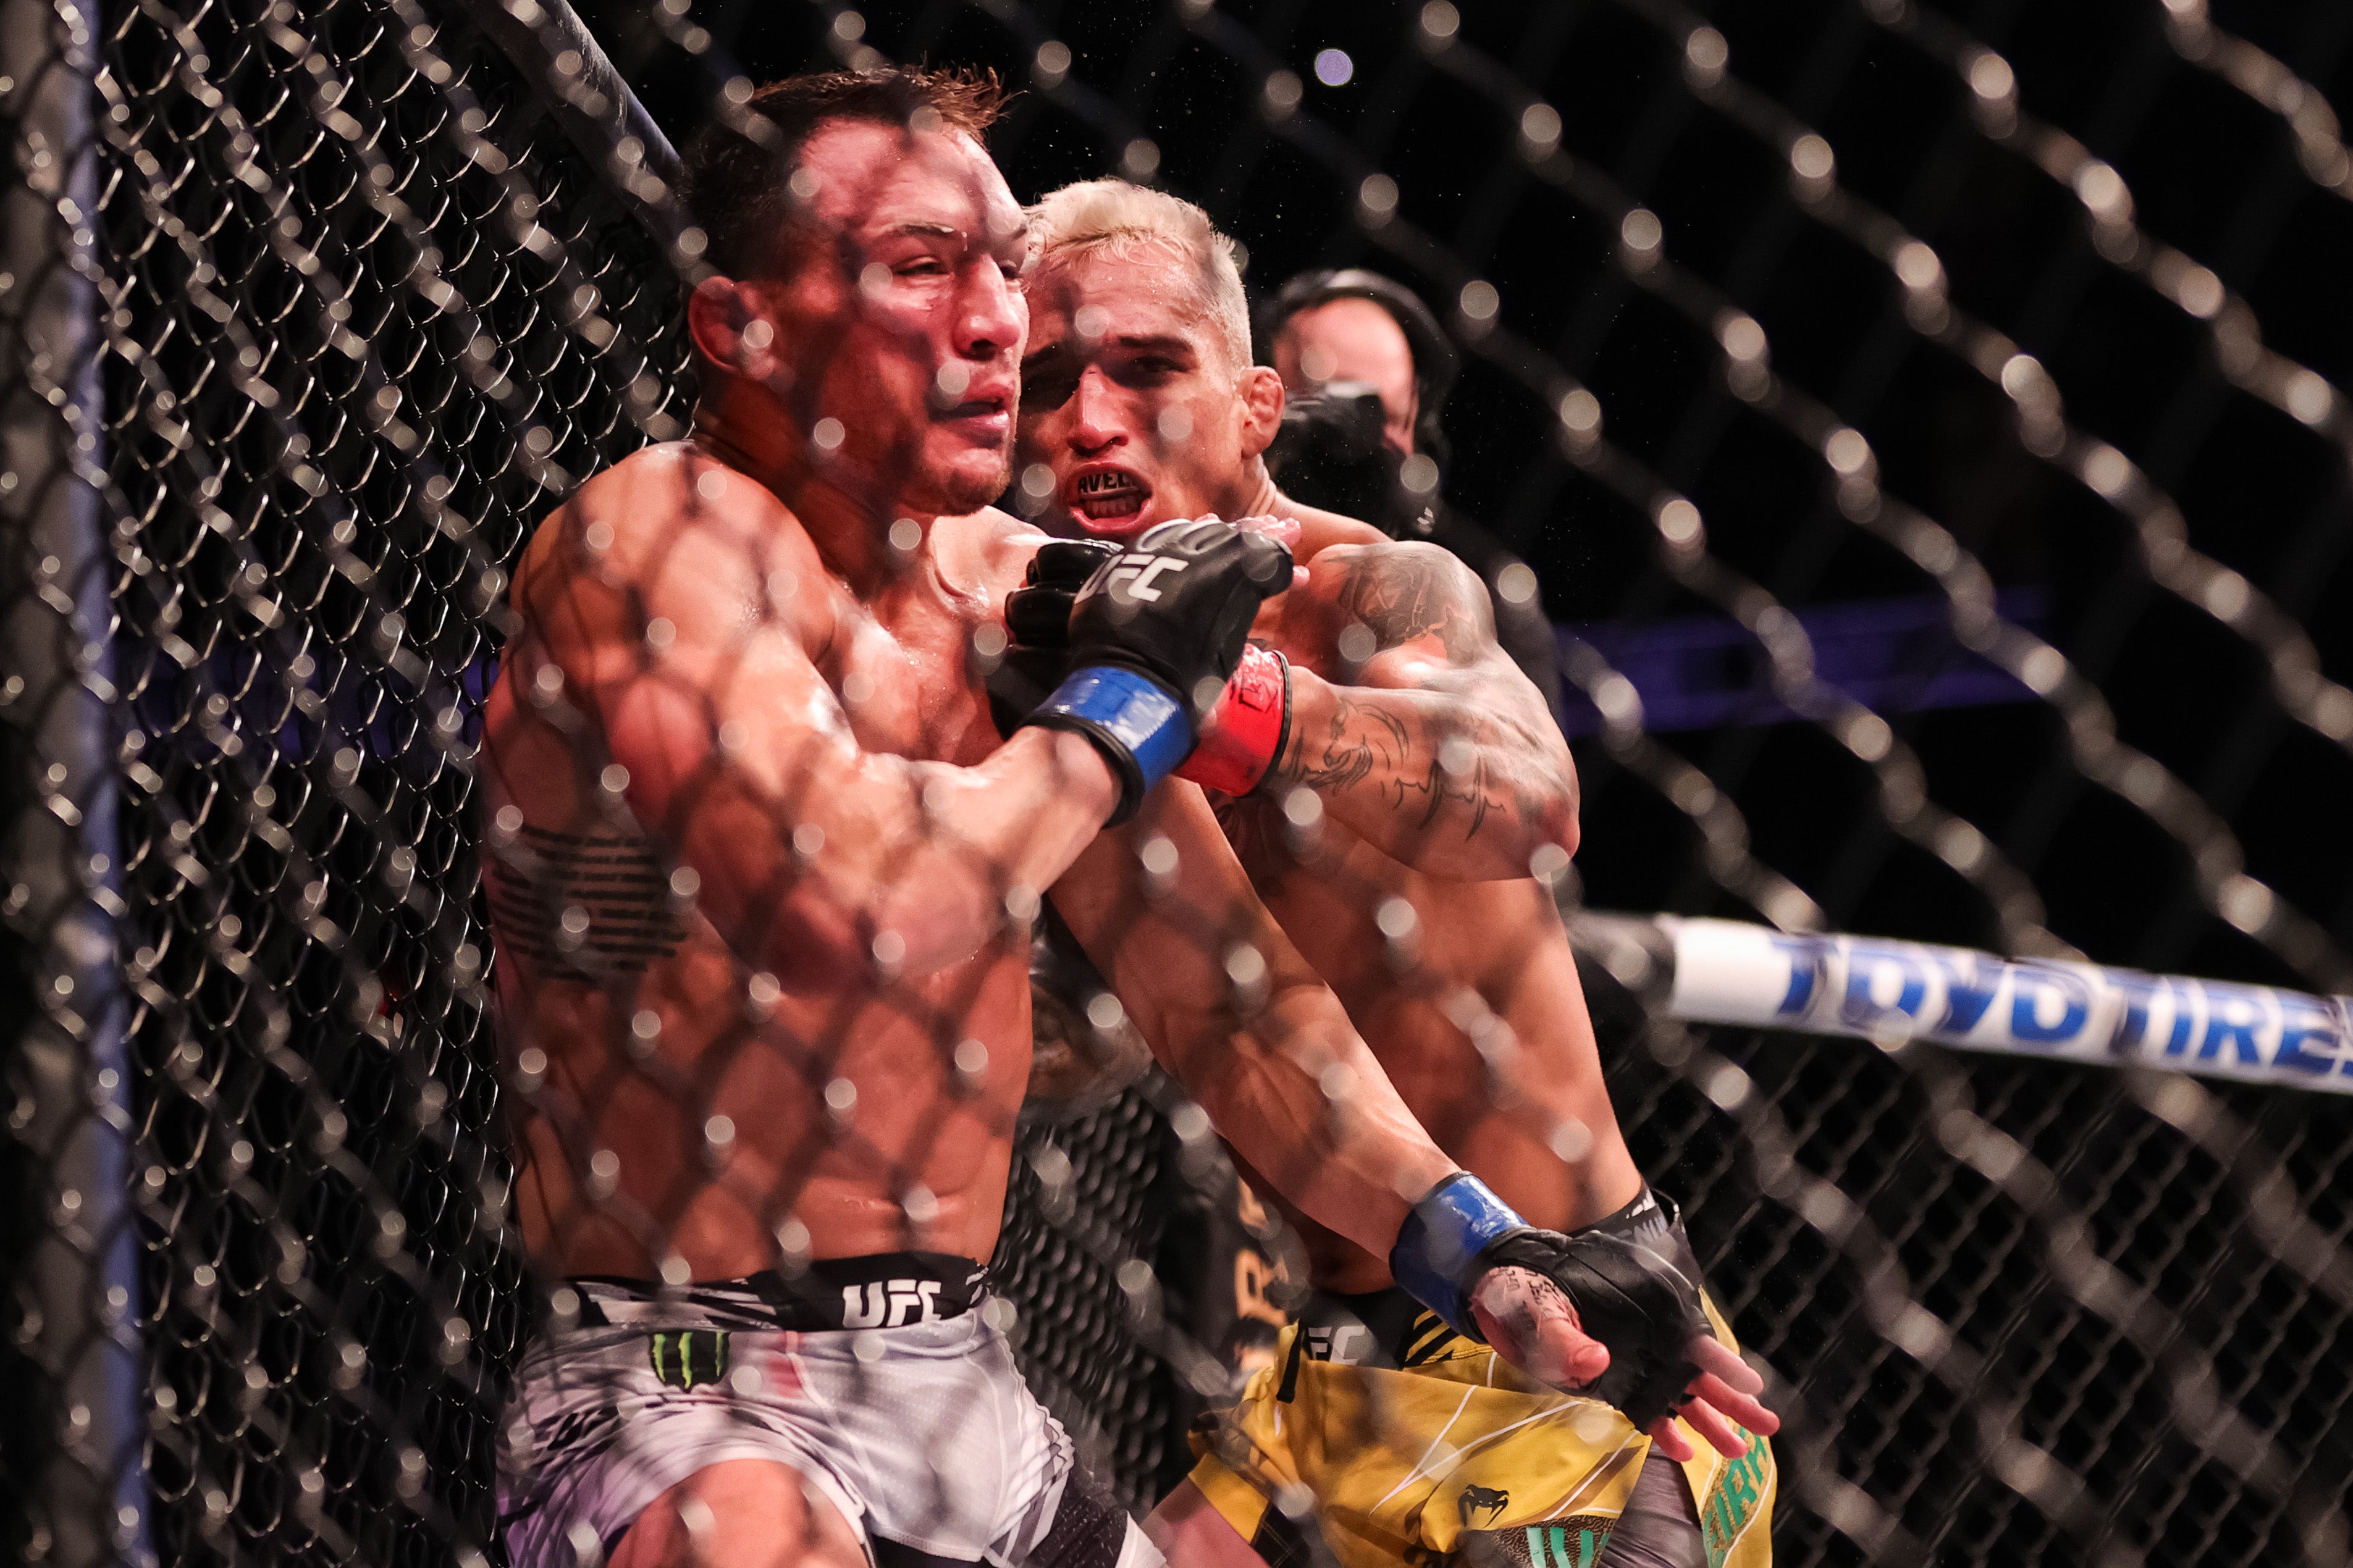 Oliveira knocked out Michael Chandler to win the vacant UFC lightweight title